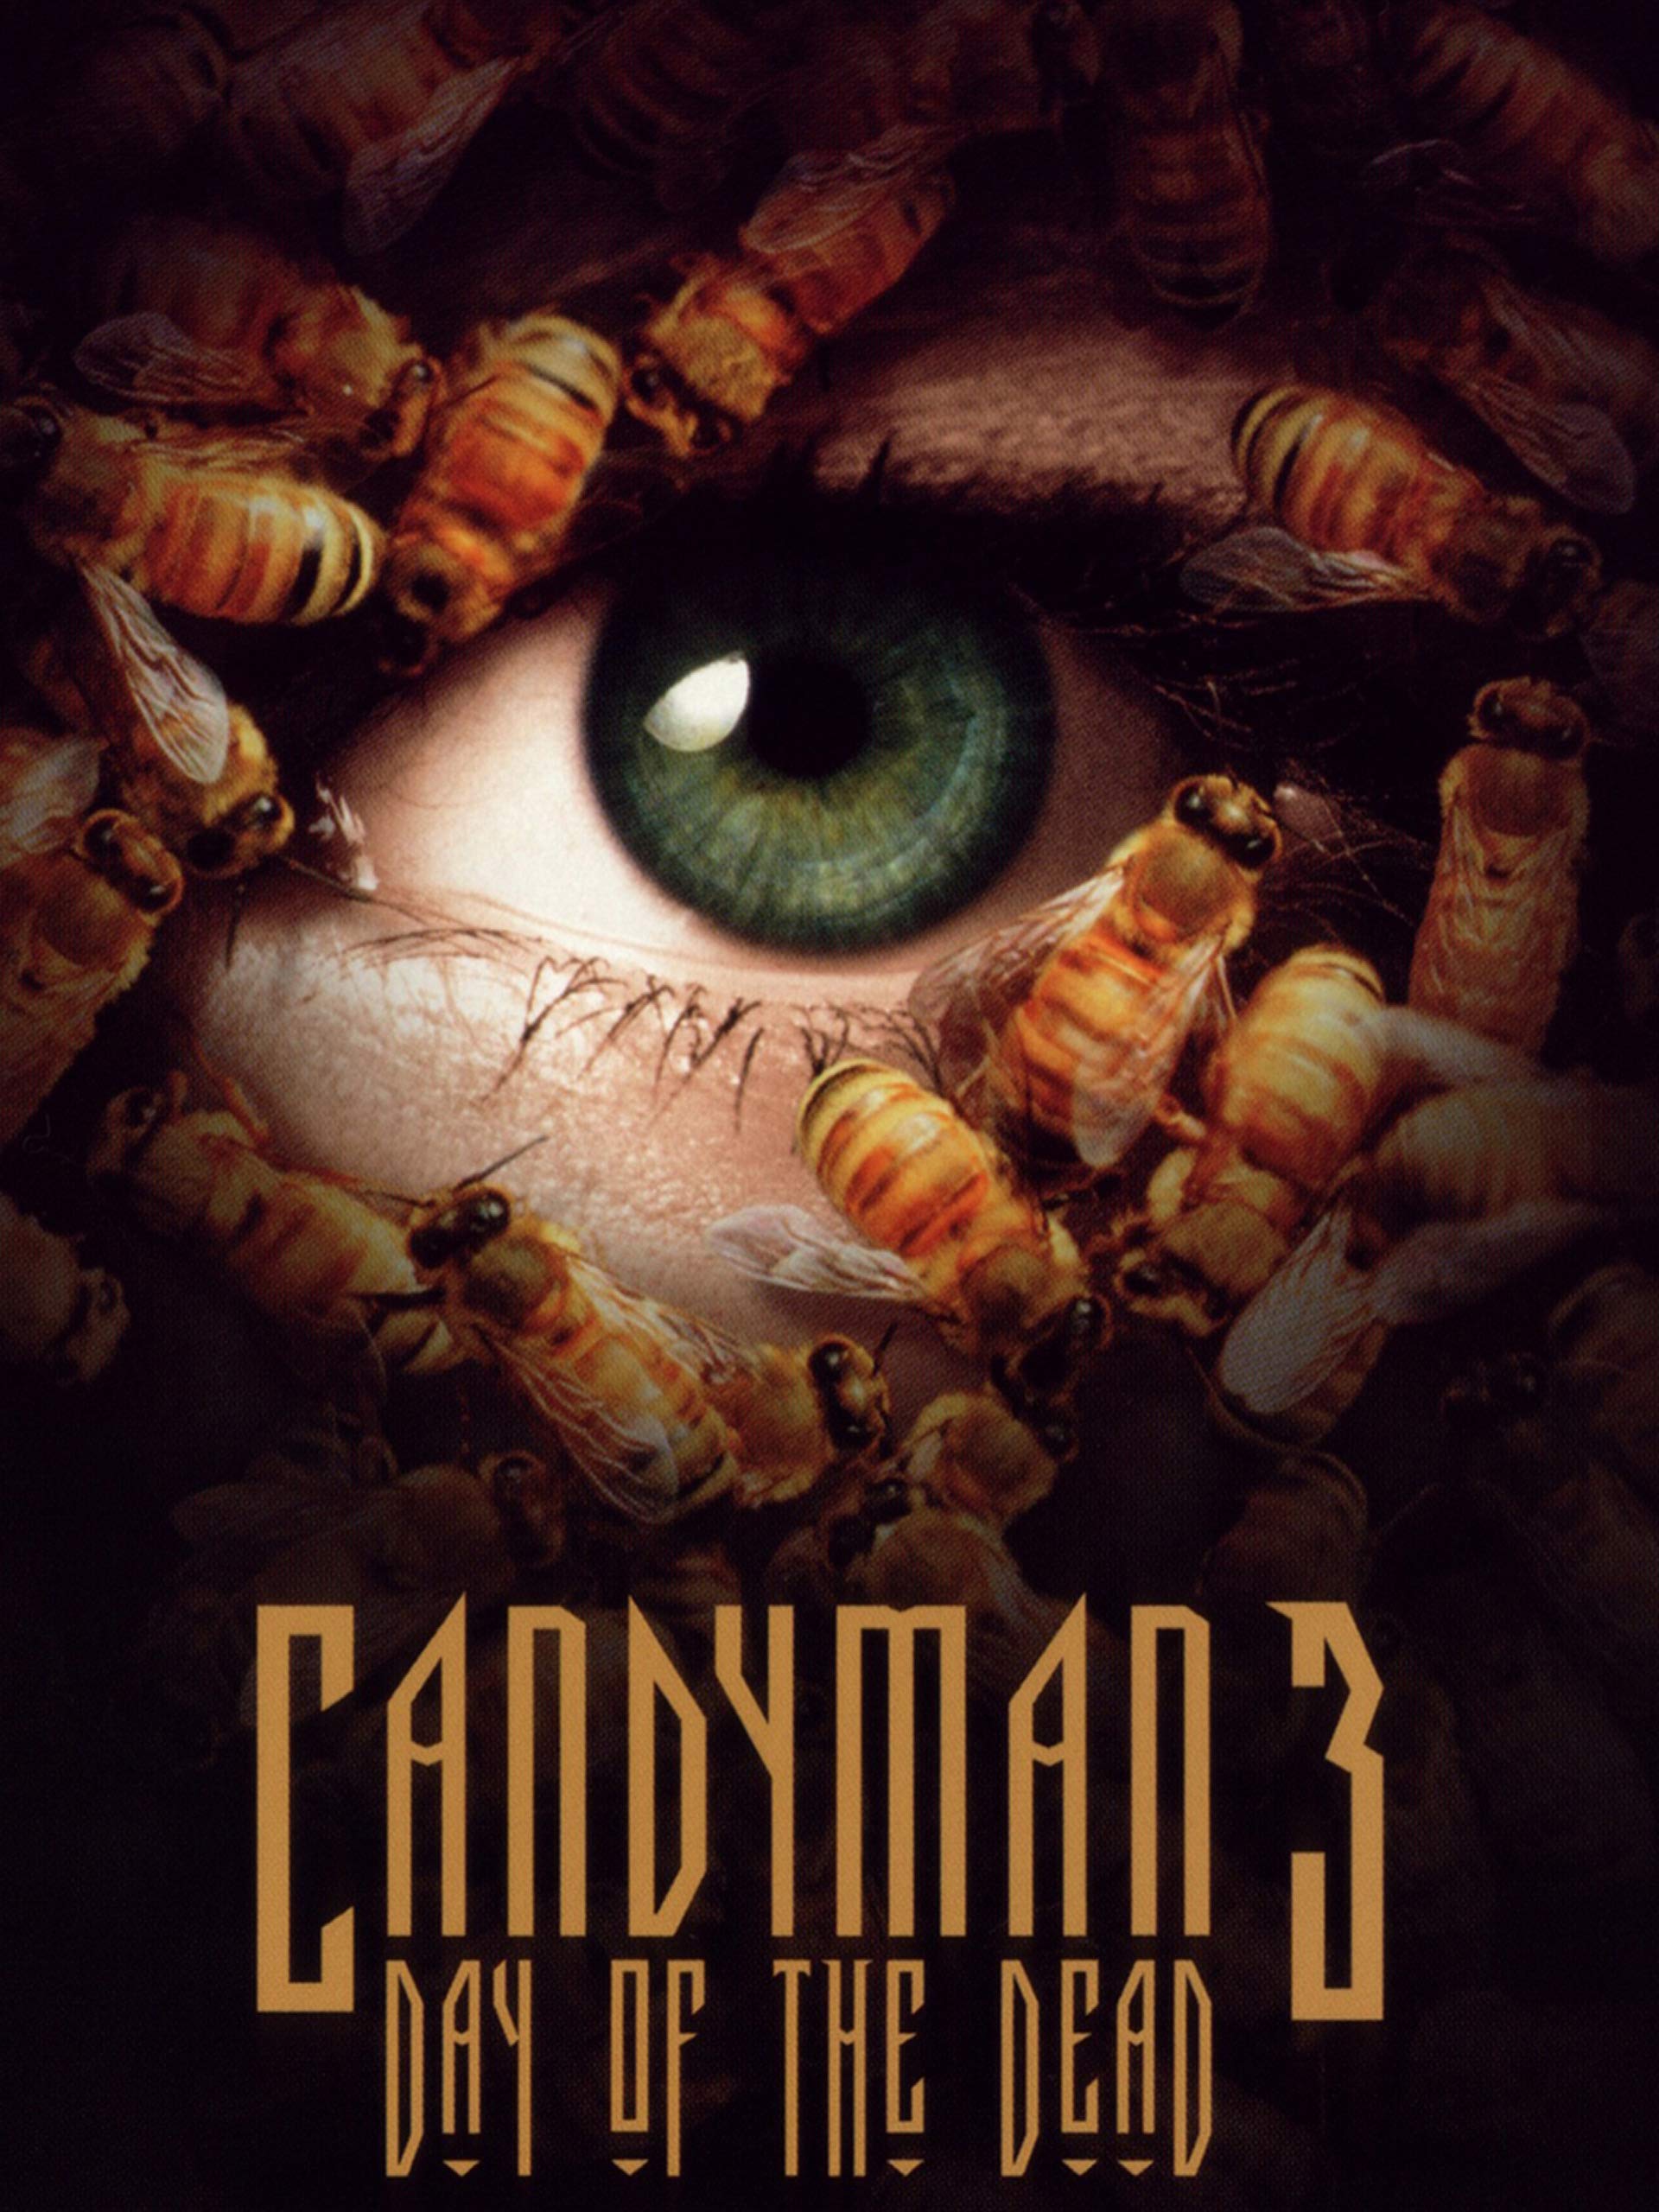 Watch Candyman 3: Day of the Dead